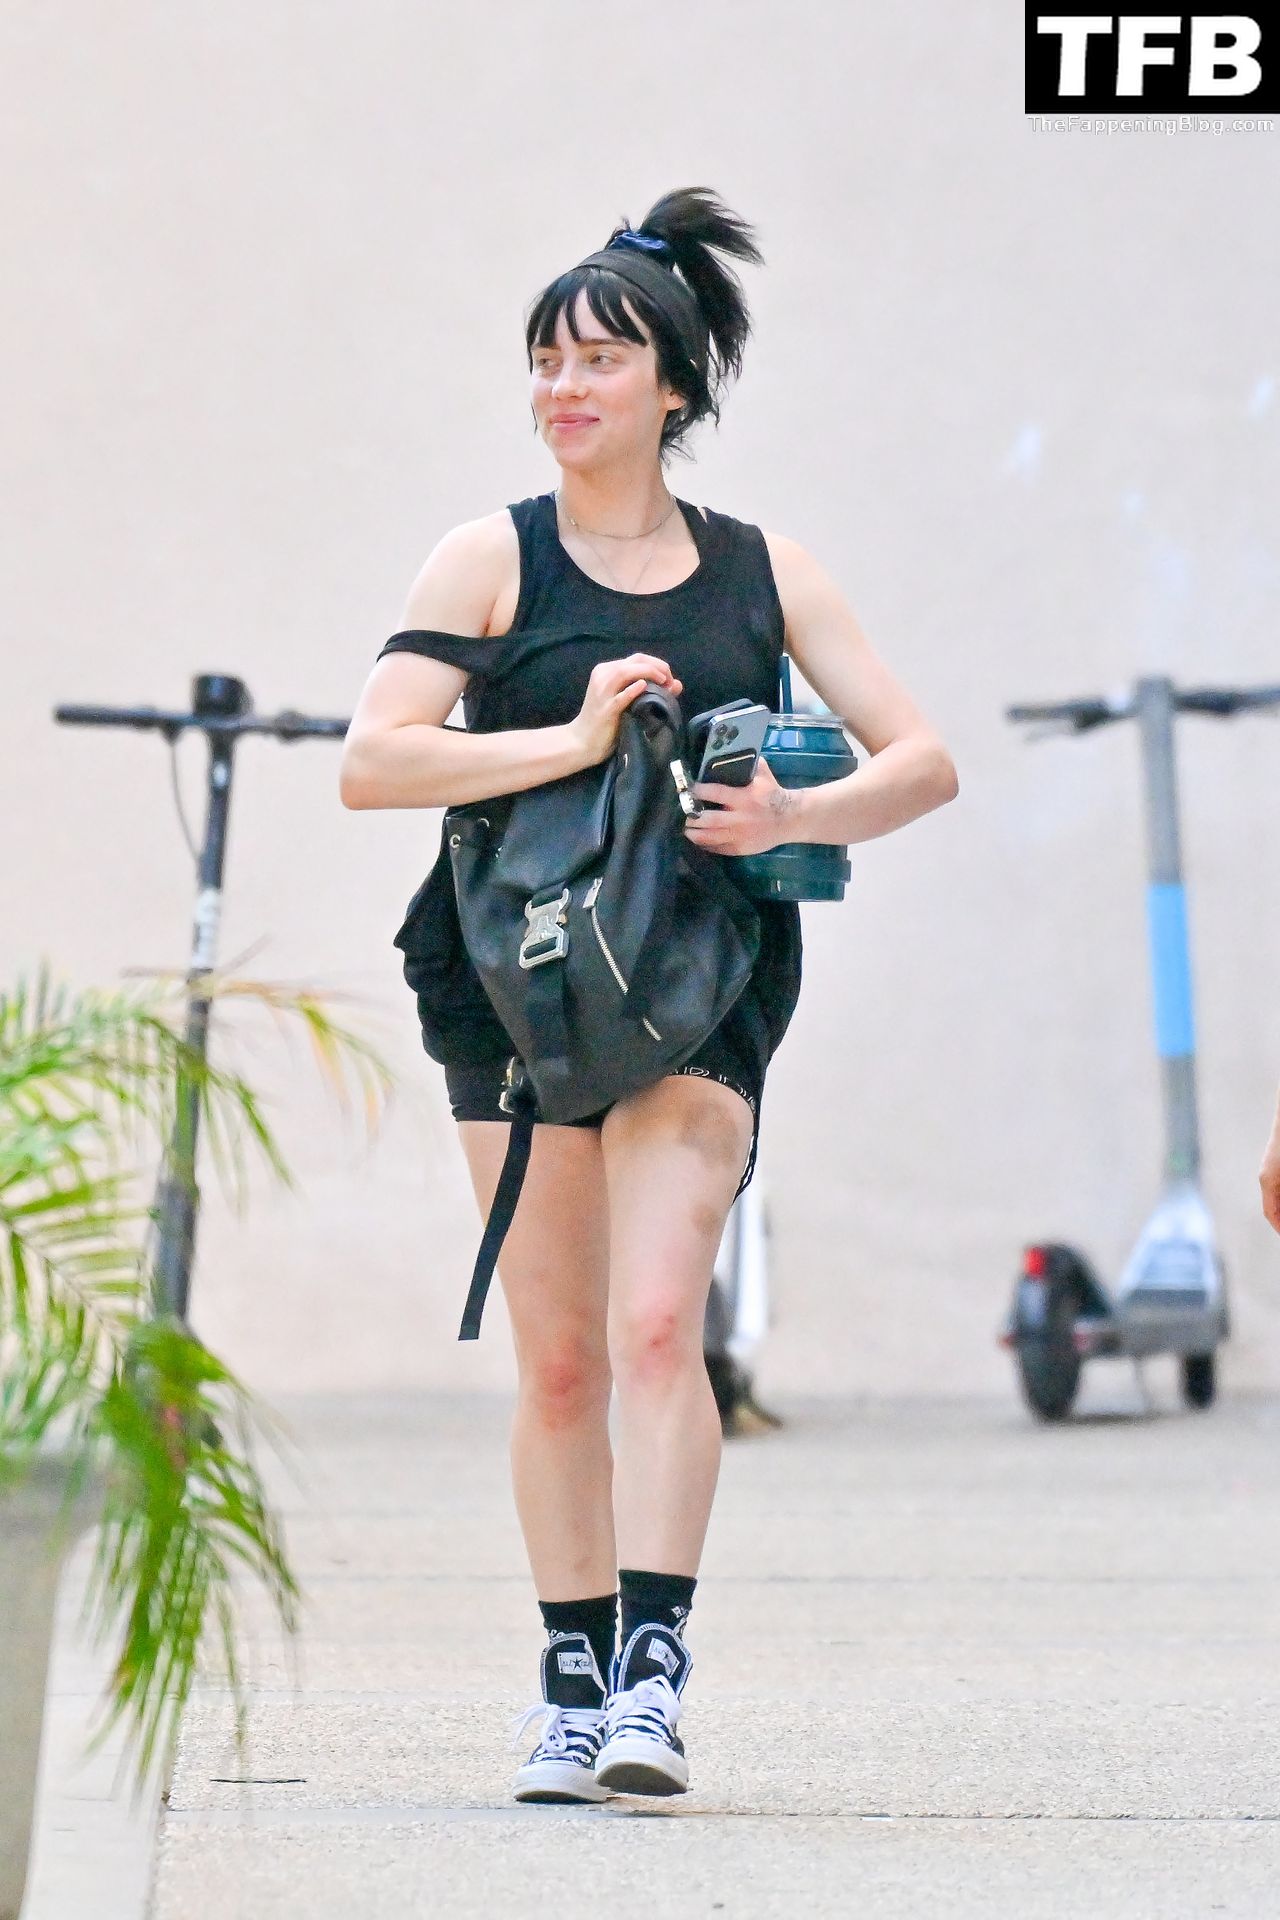 Billie Eilish Sexy The Fappening Blog 12 - Billie Eilish Keeps Up Her Fitness Regime, Stepping Out For Another Workout in Studio City (26 Photos)